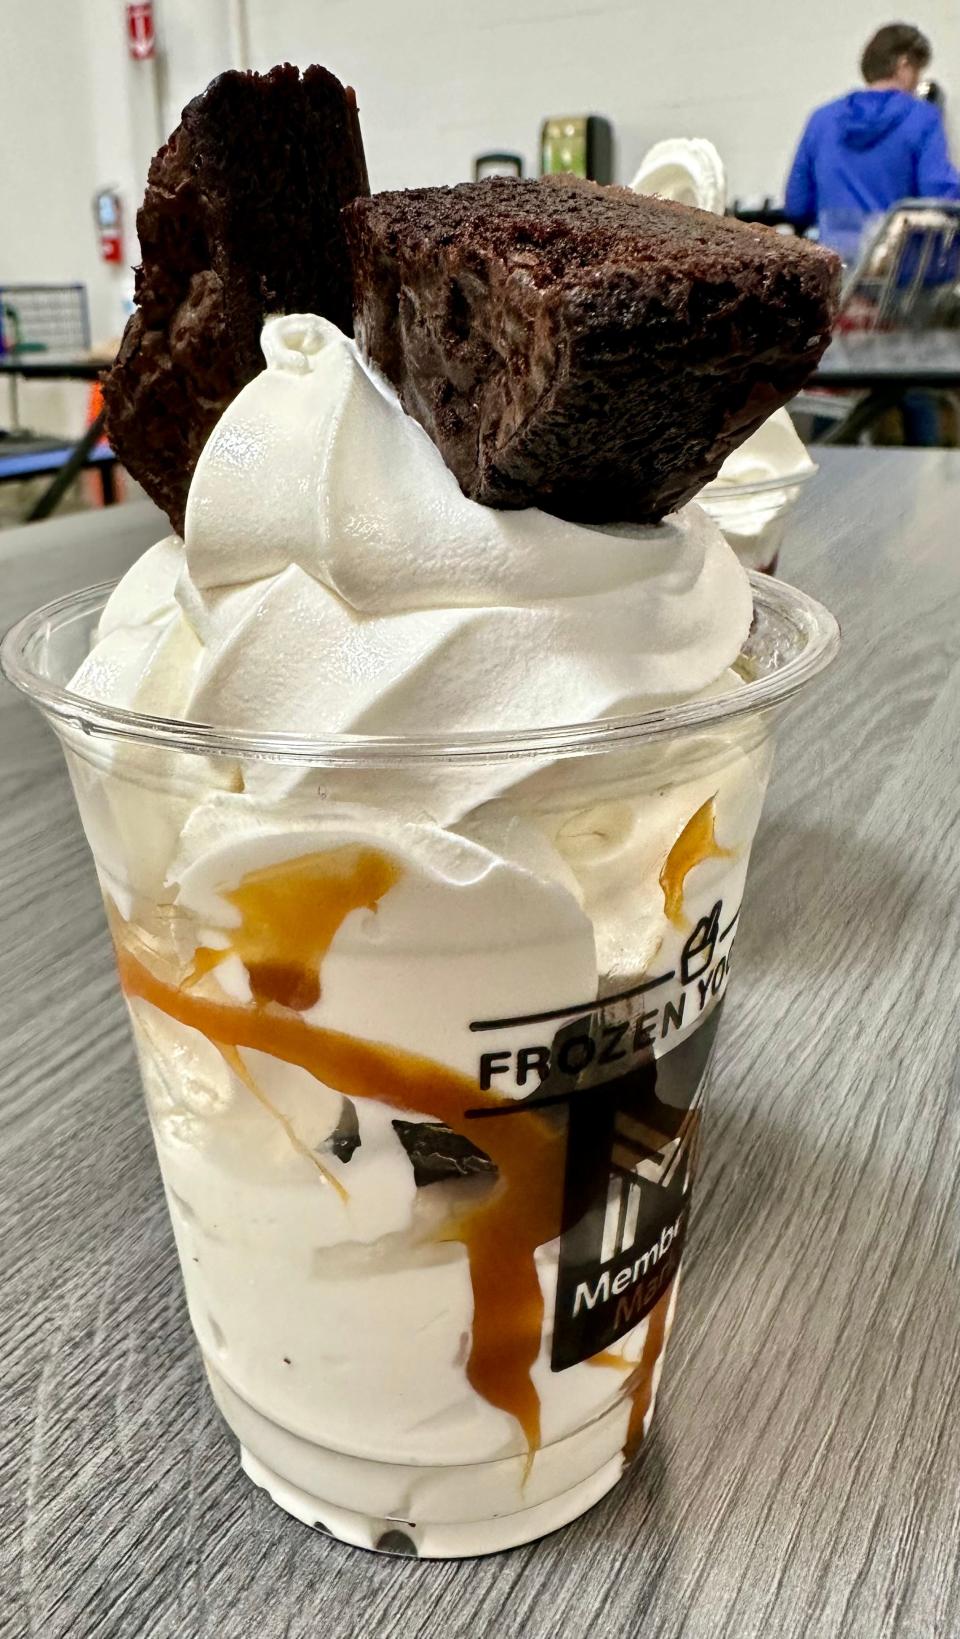 This brownie sundae, although tasty, is a challenge to eat with chunks of brownie too large to eat with a plastic spoon.